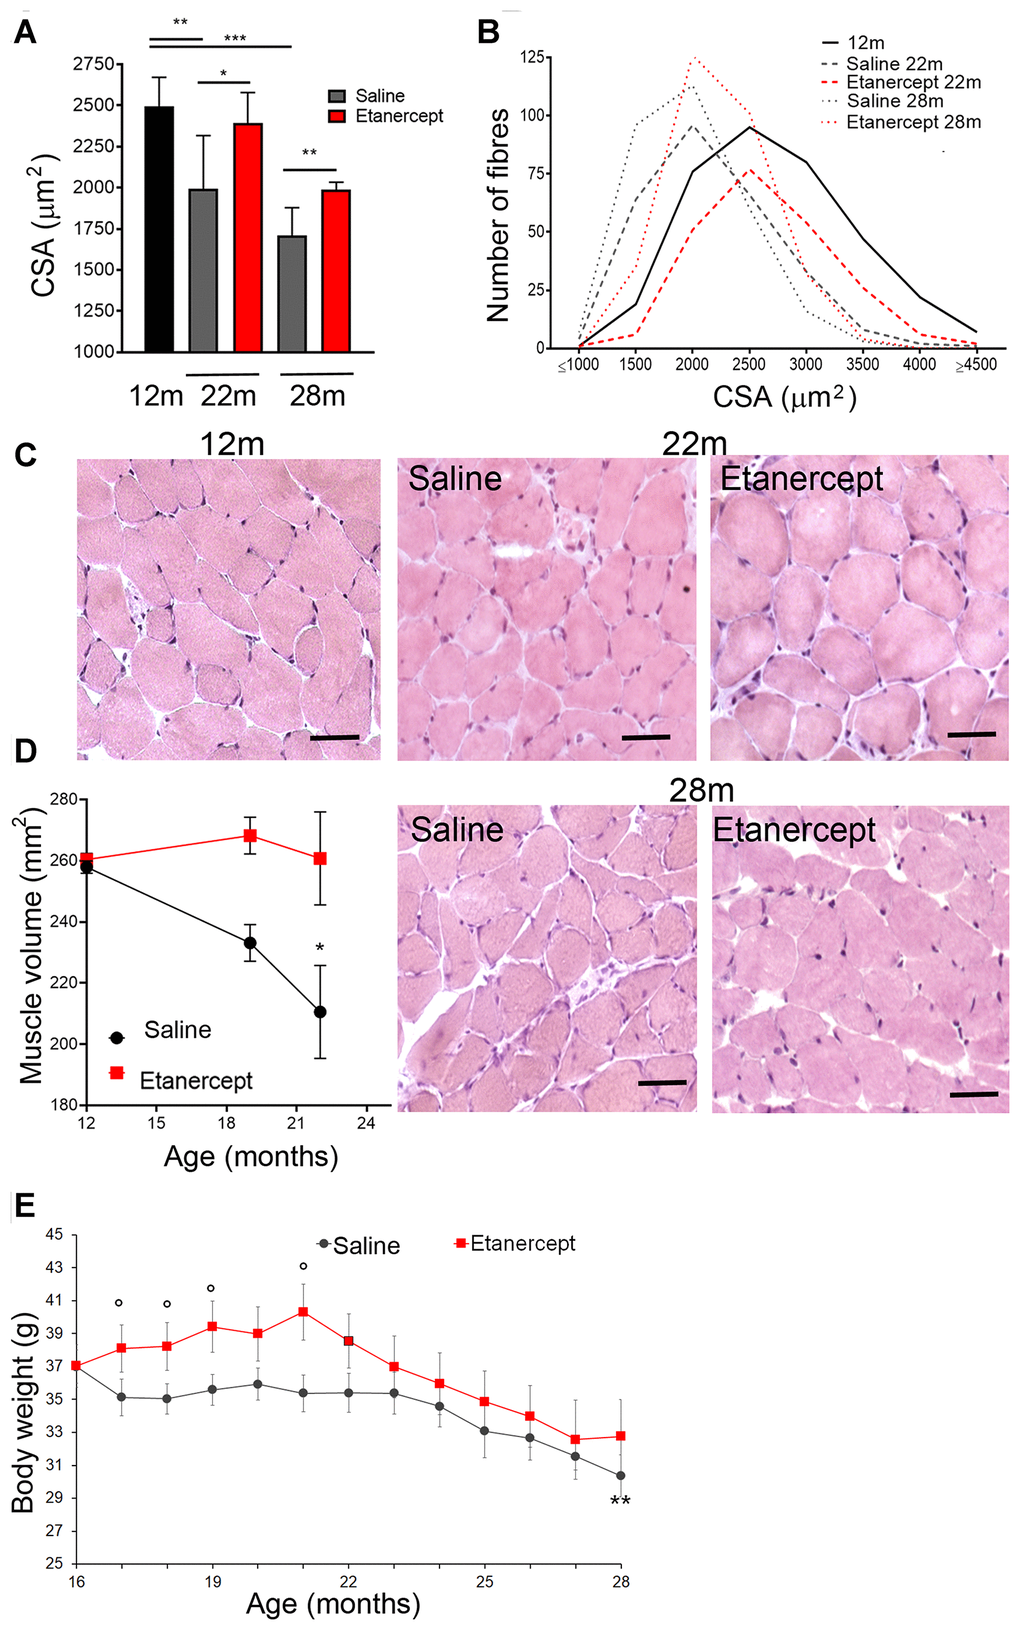 Blockade of TNFα by Etanercept inhibited sarcopenia during spontaneous aging. Measurement of cross-sectional area (CSA) (A) and fiber size distribution (B) in GS of 12 months old mice and in control (saline) or Etanercept-treated mice at 22 and 28 months of age. *=pC) Representative histochemical images of GS muscle sections analyzed in 12 months old mice and in control or Etanercept-treated mice at 22 and 28 months of age. Scale bar=50 μm (magnification of the16x) (D). MRI measurement of muscle volume for control or Etanercept-treated mice at 12, 19 and 22 months of age. *=pE) Body weight of control and Etanercept-treated mice monitored between 16 and 28 months of age. ** =p